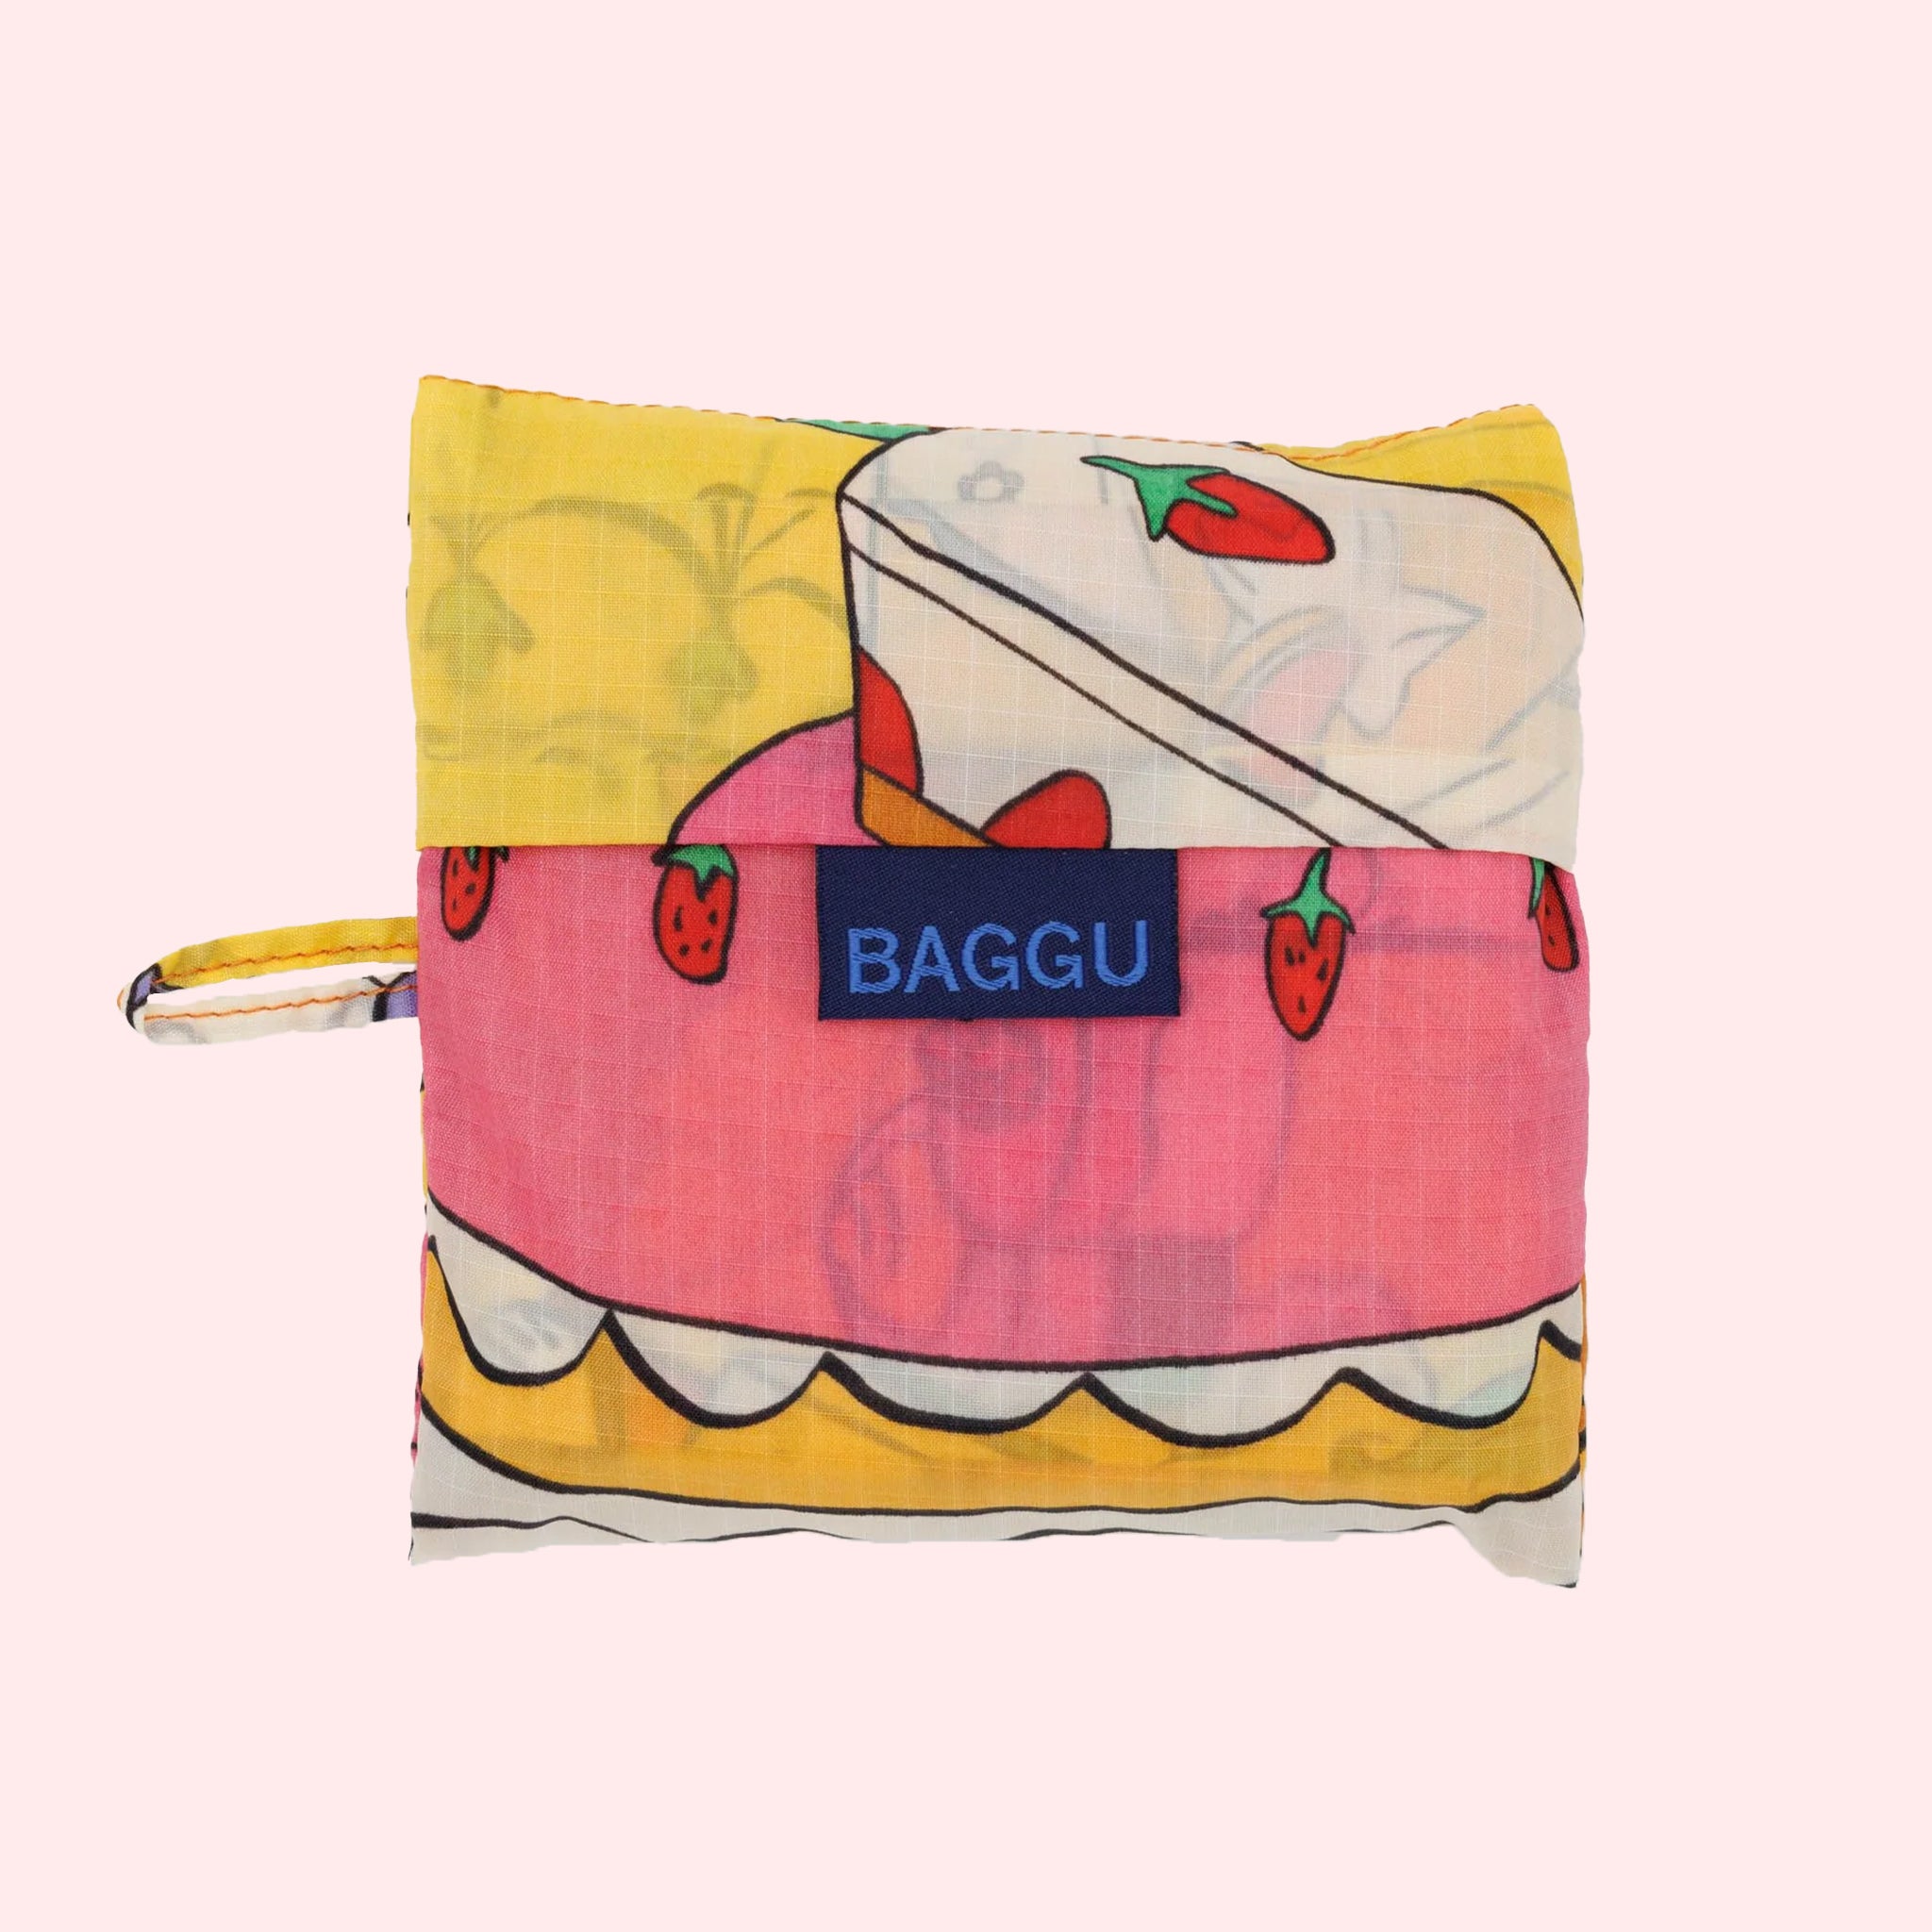 A yellow nylon tote bag with a colorful pattern of various desserts.'